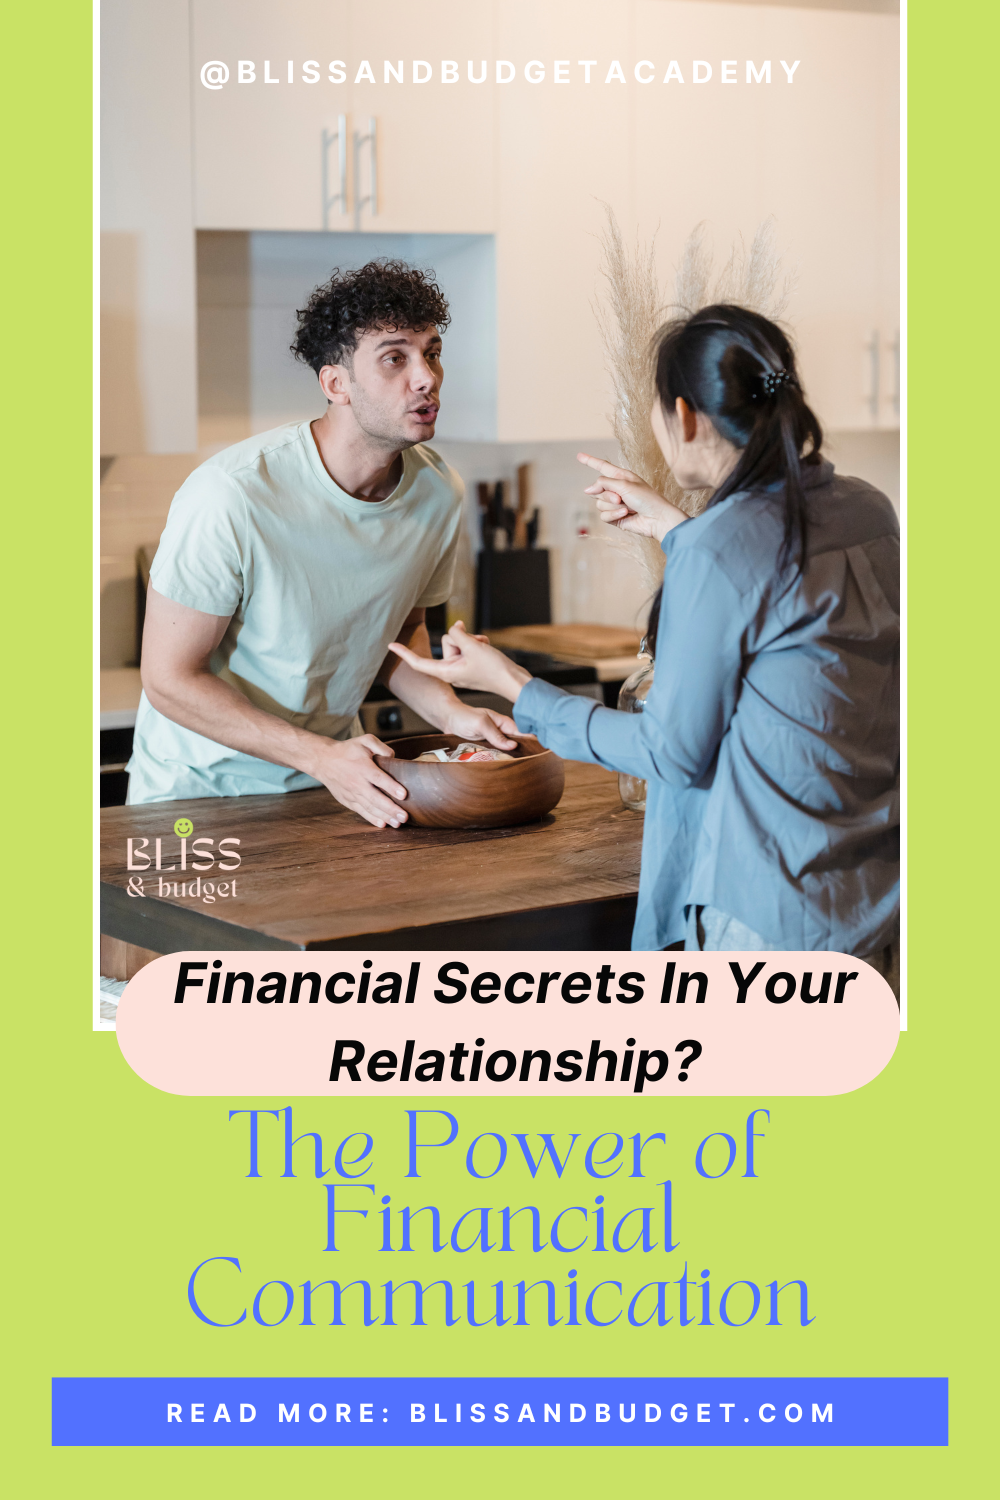 Financial Secrets In Your Relationship? The Power of Financial Communication